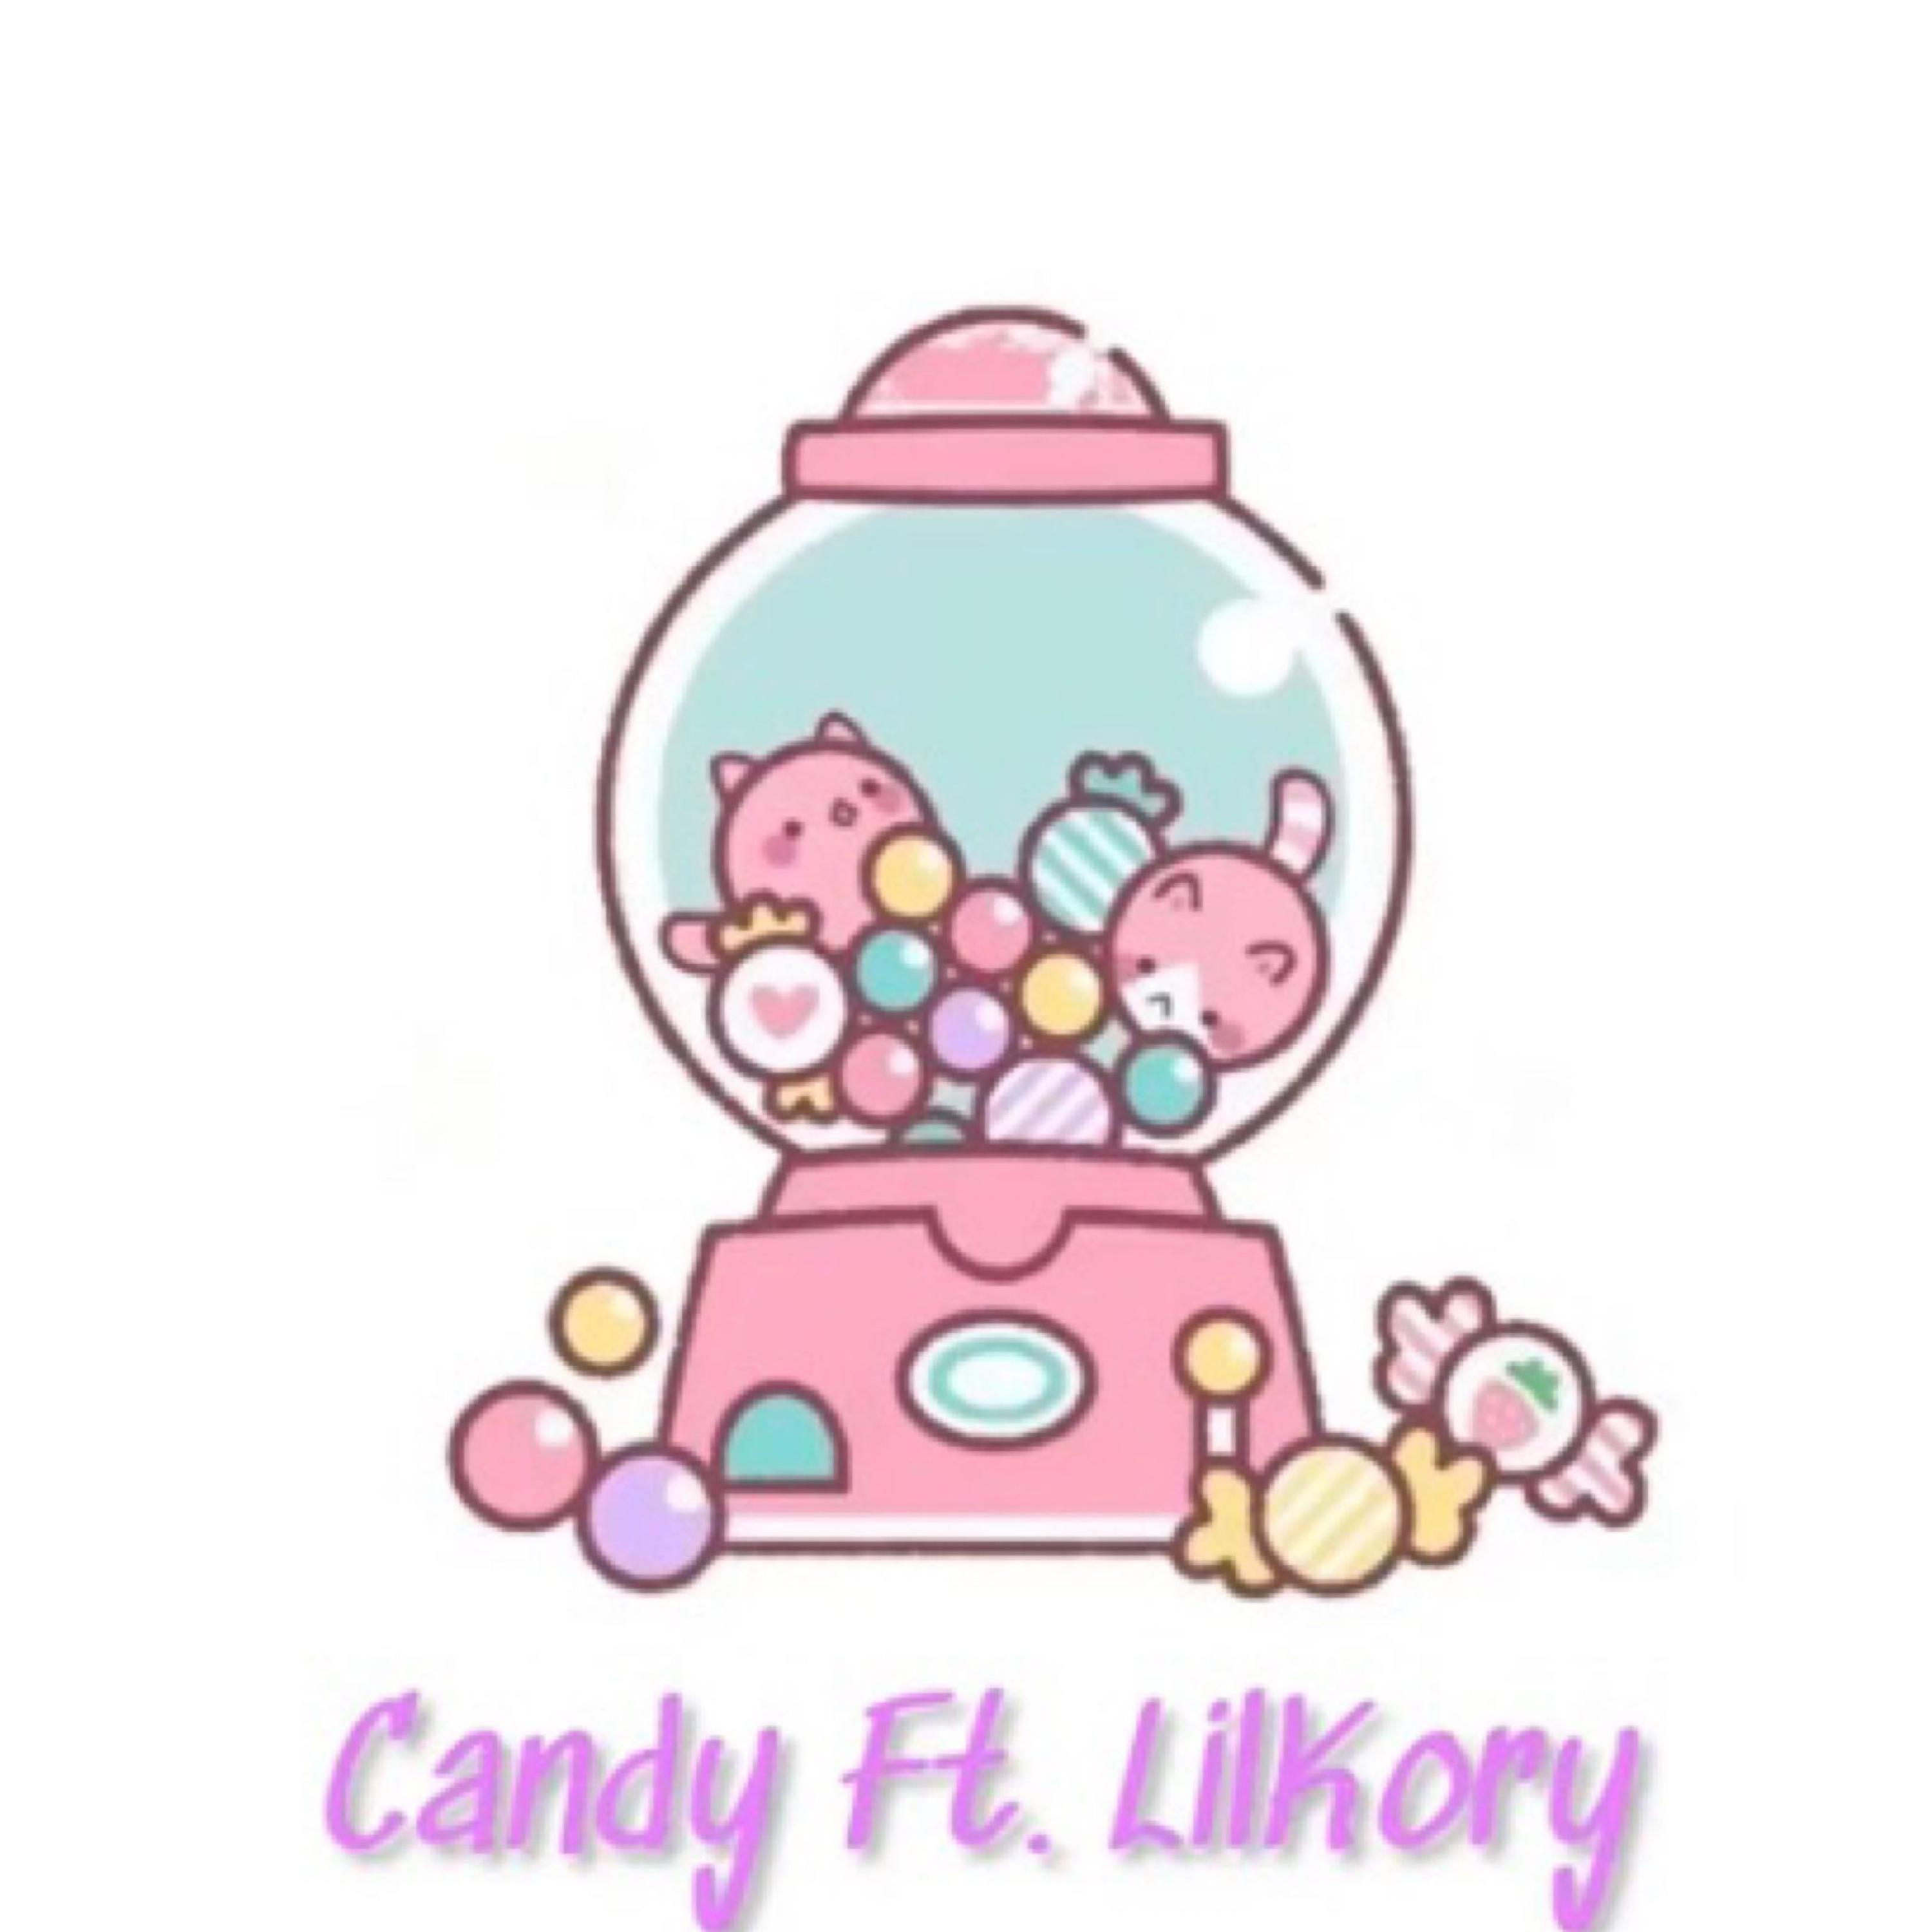 LilBread19 - Candy (feat. Lil Kory)